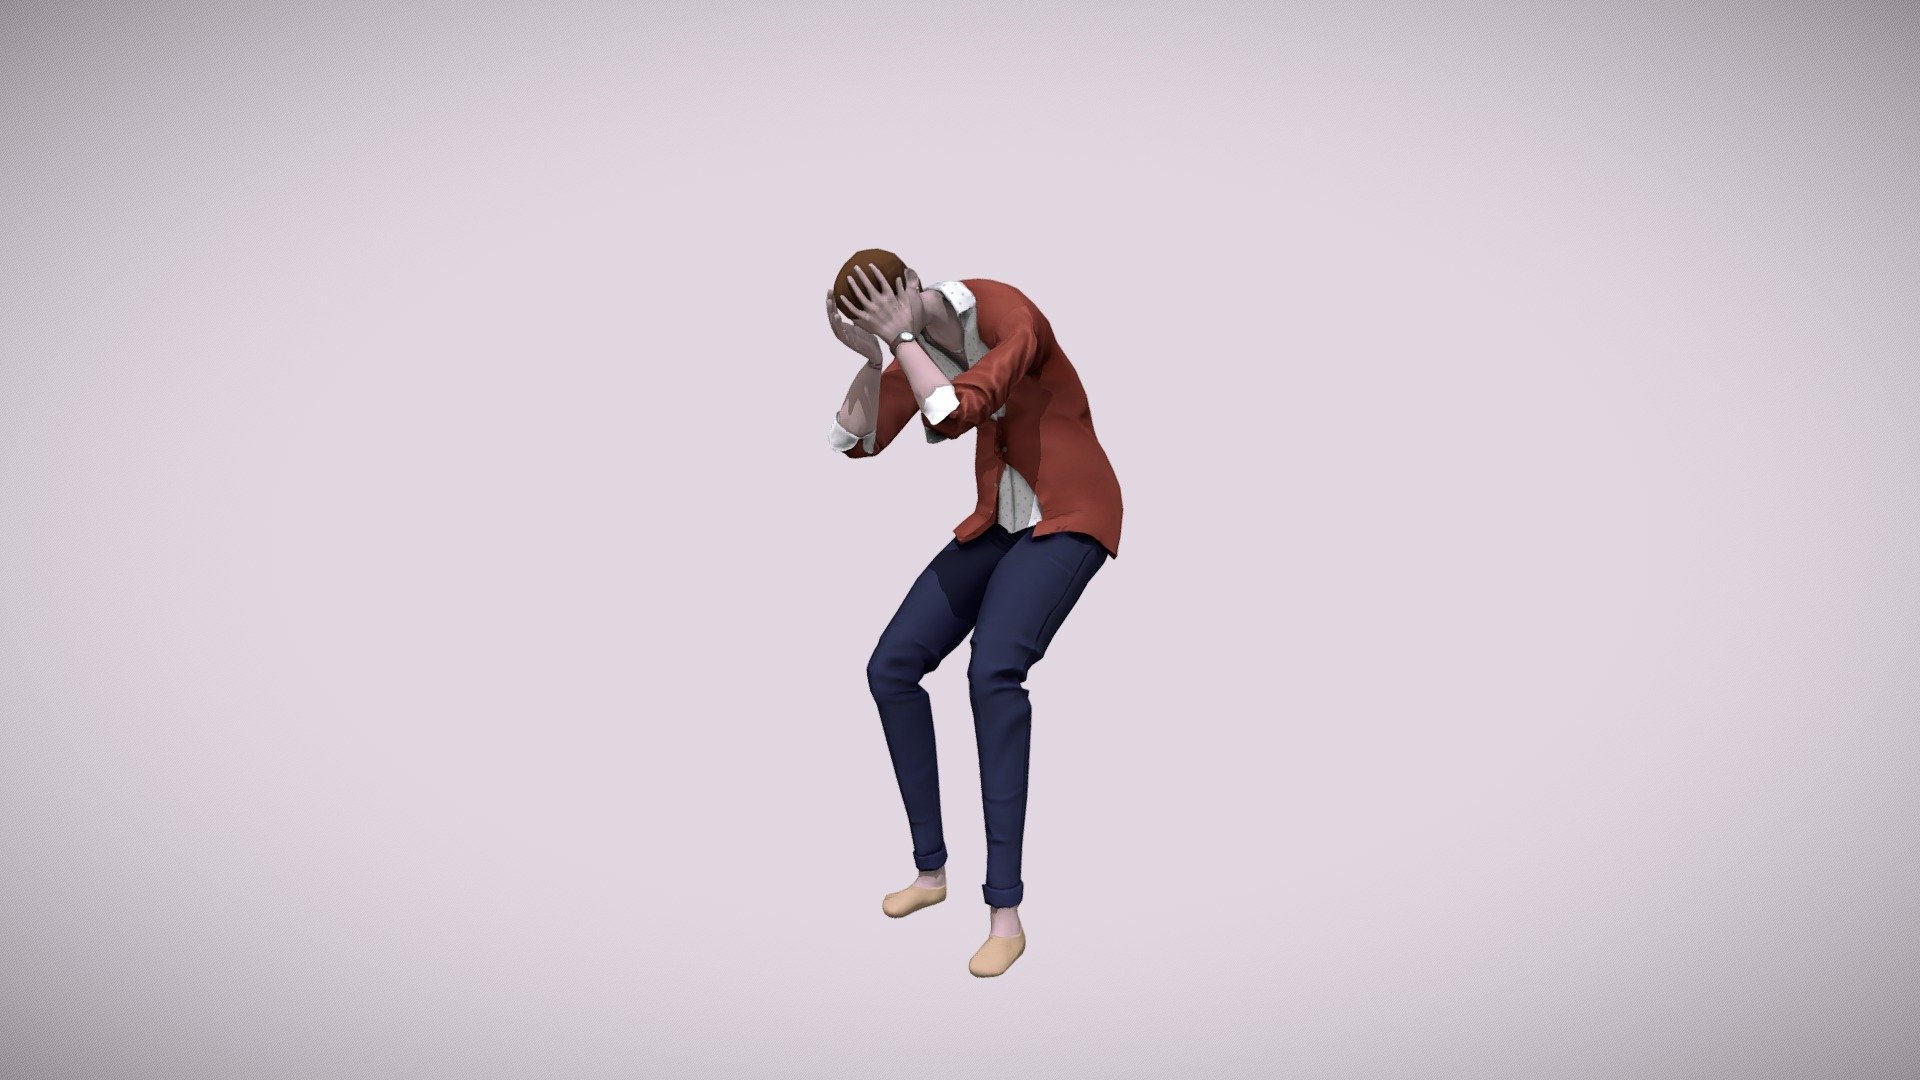 Character animations I have done for our Graduation game Fallin' 
Check out the full post here: https://www.artstation.com/artwork/GamPoB - Fallin' - Main Character (Civilian) - 3D model by julialalart 3d model